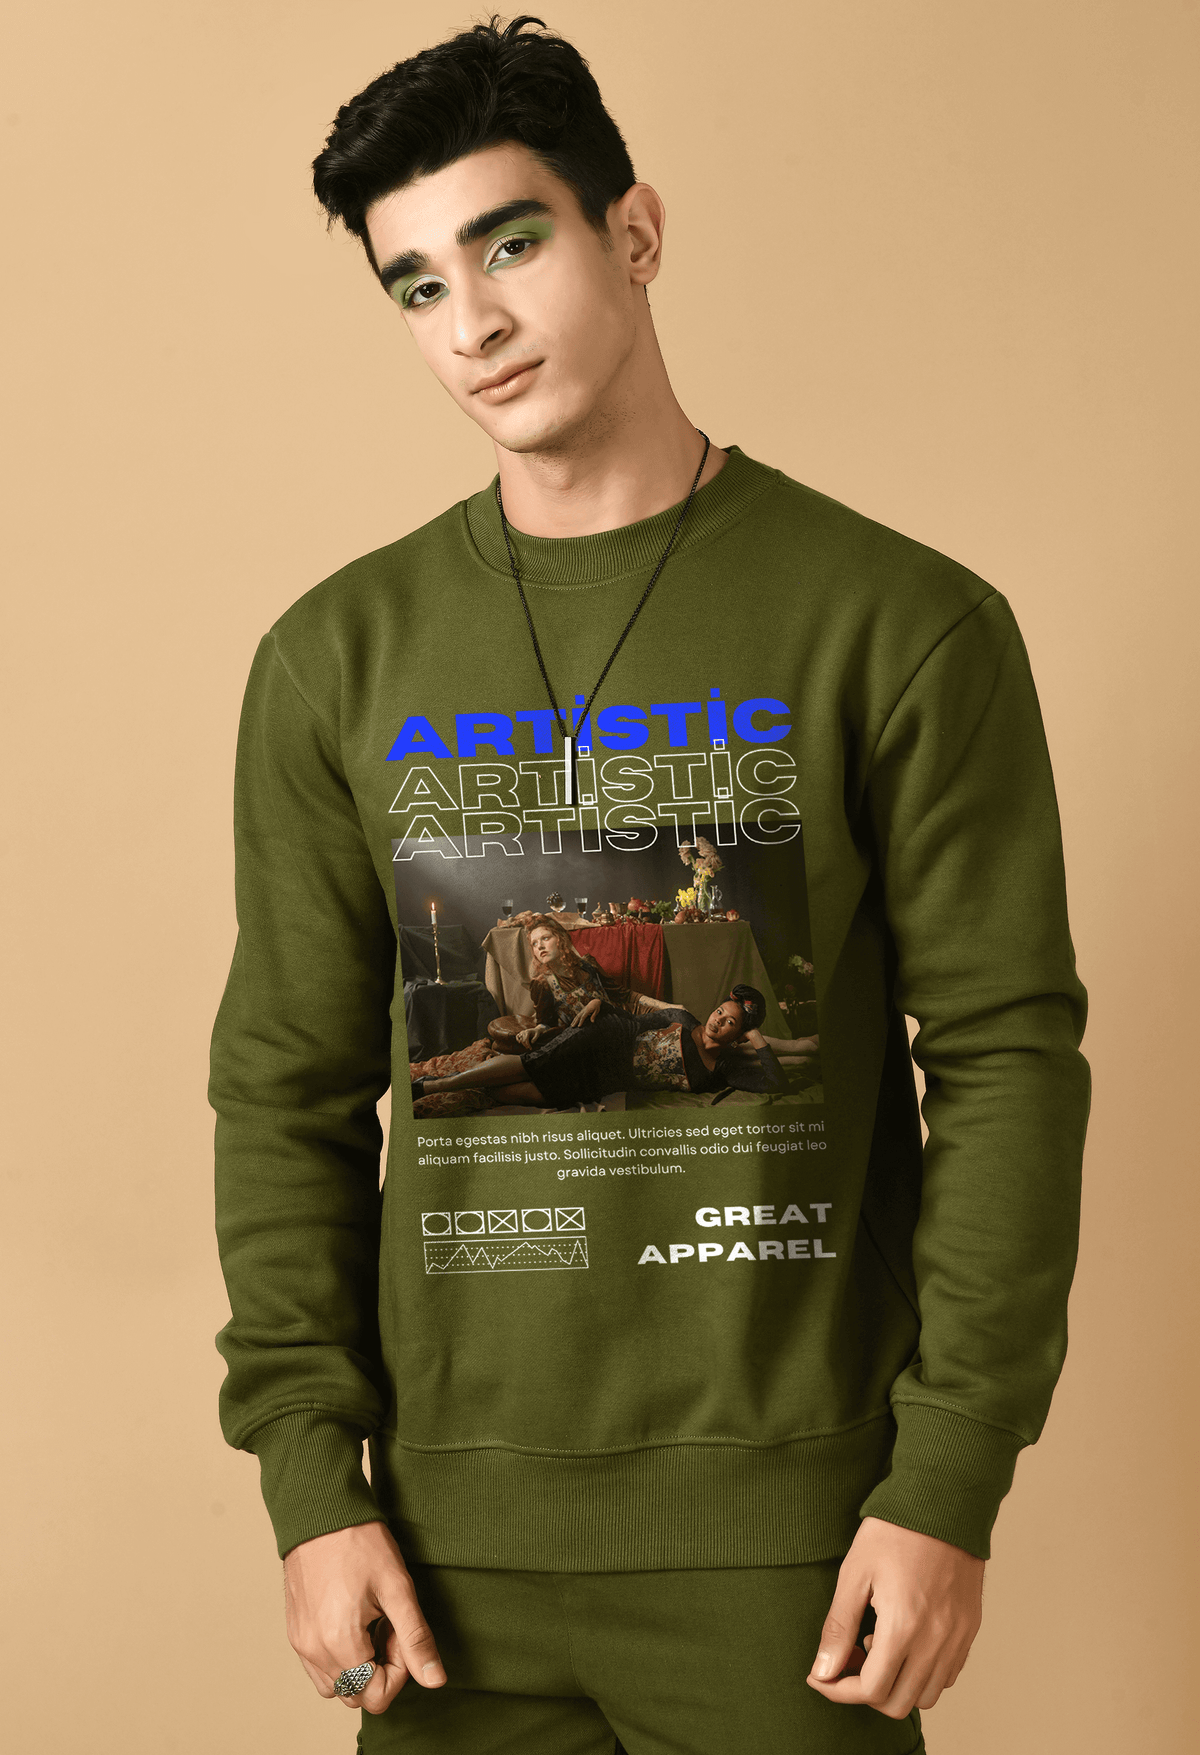 Artistic olive green color sweatshirt by offmint